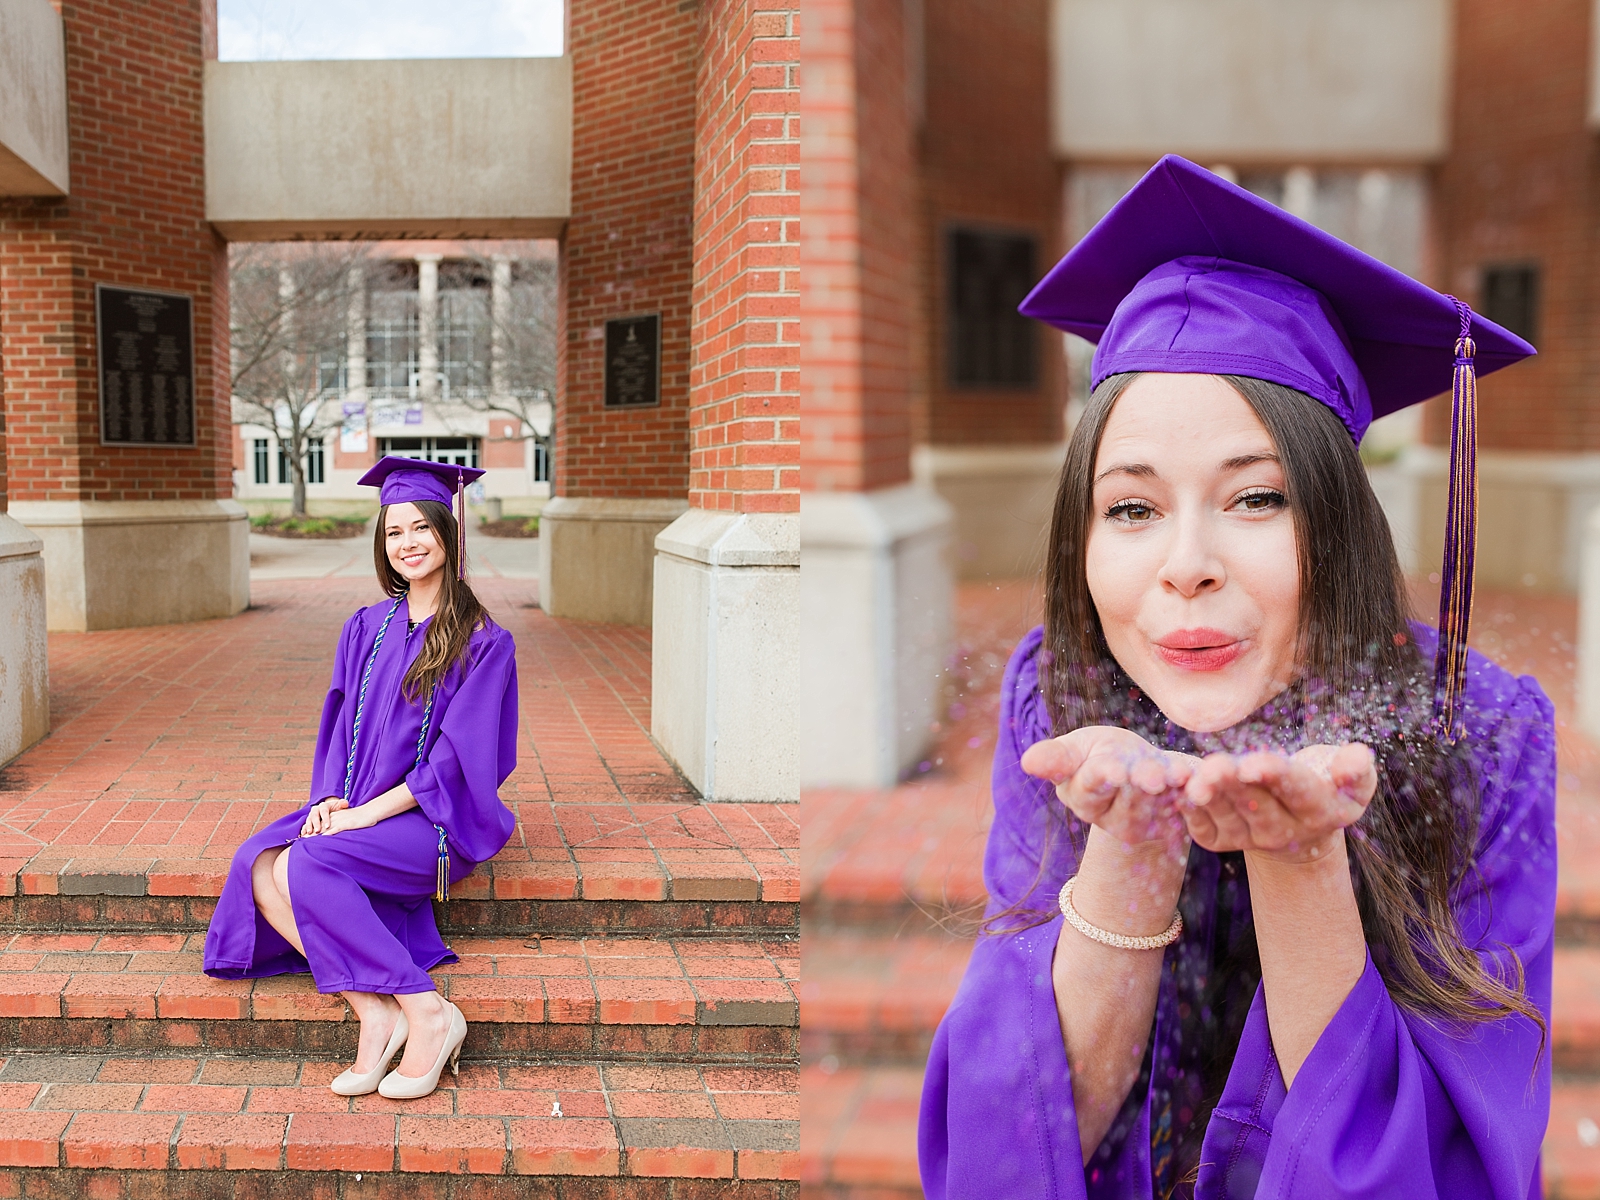 Western Carolina University Senior in purple cap and gown smiling and blowing confetti photos